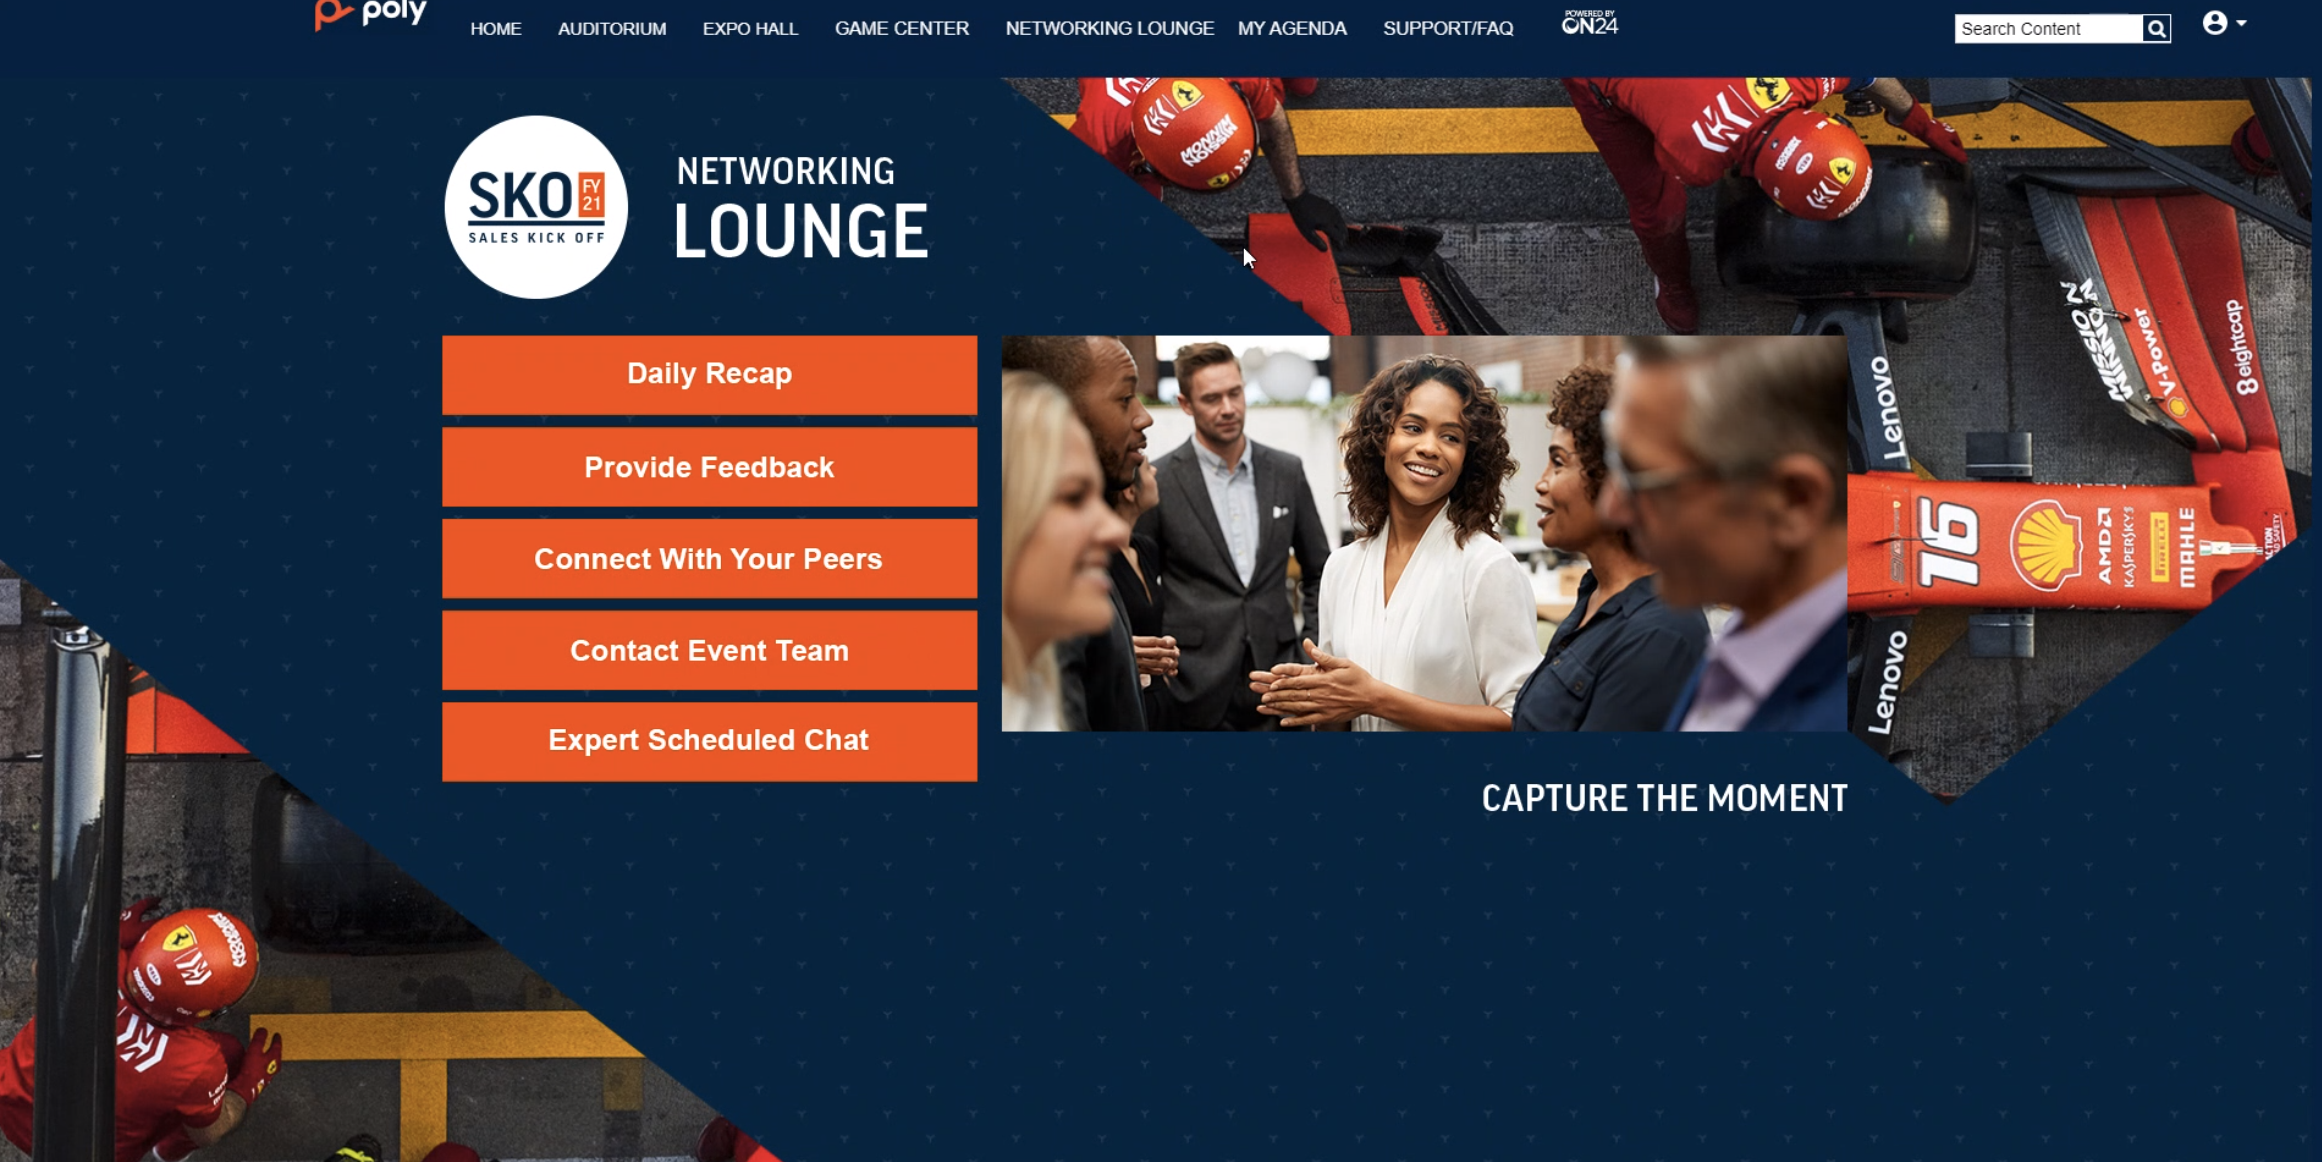 A sample of a ON24 Virtual Conference networking lounge.